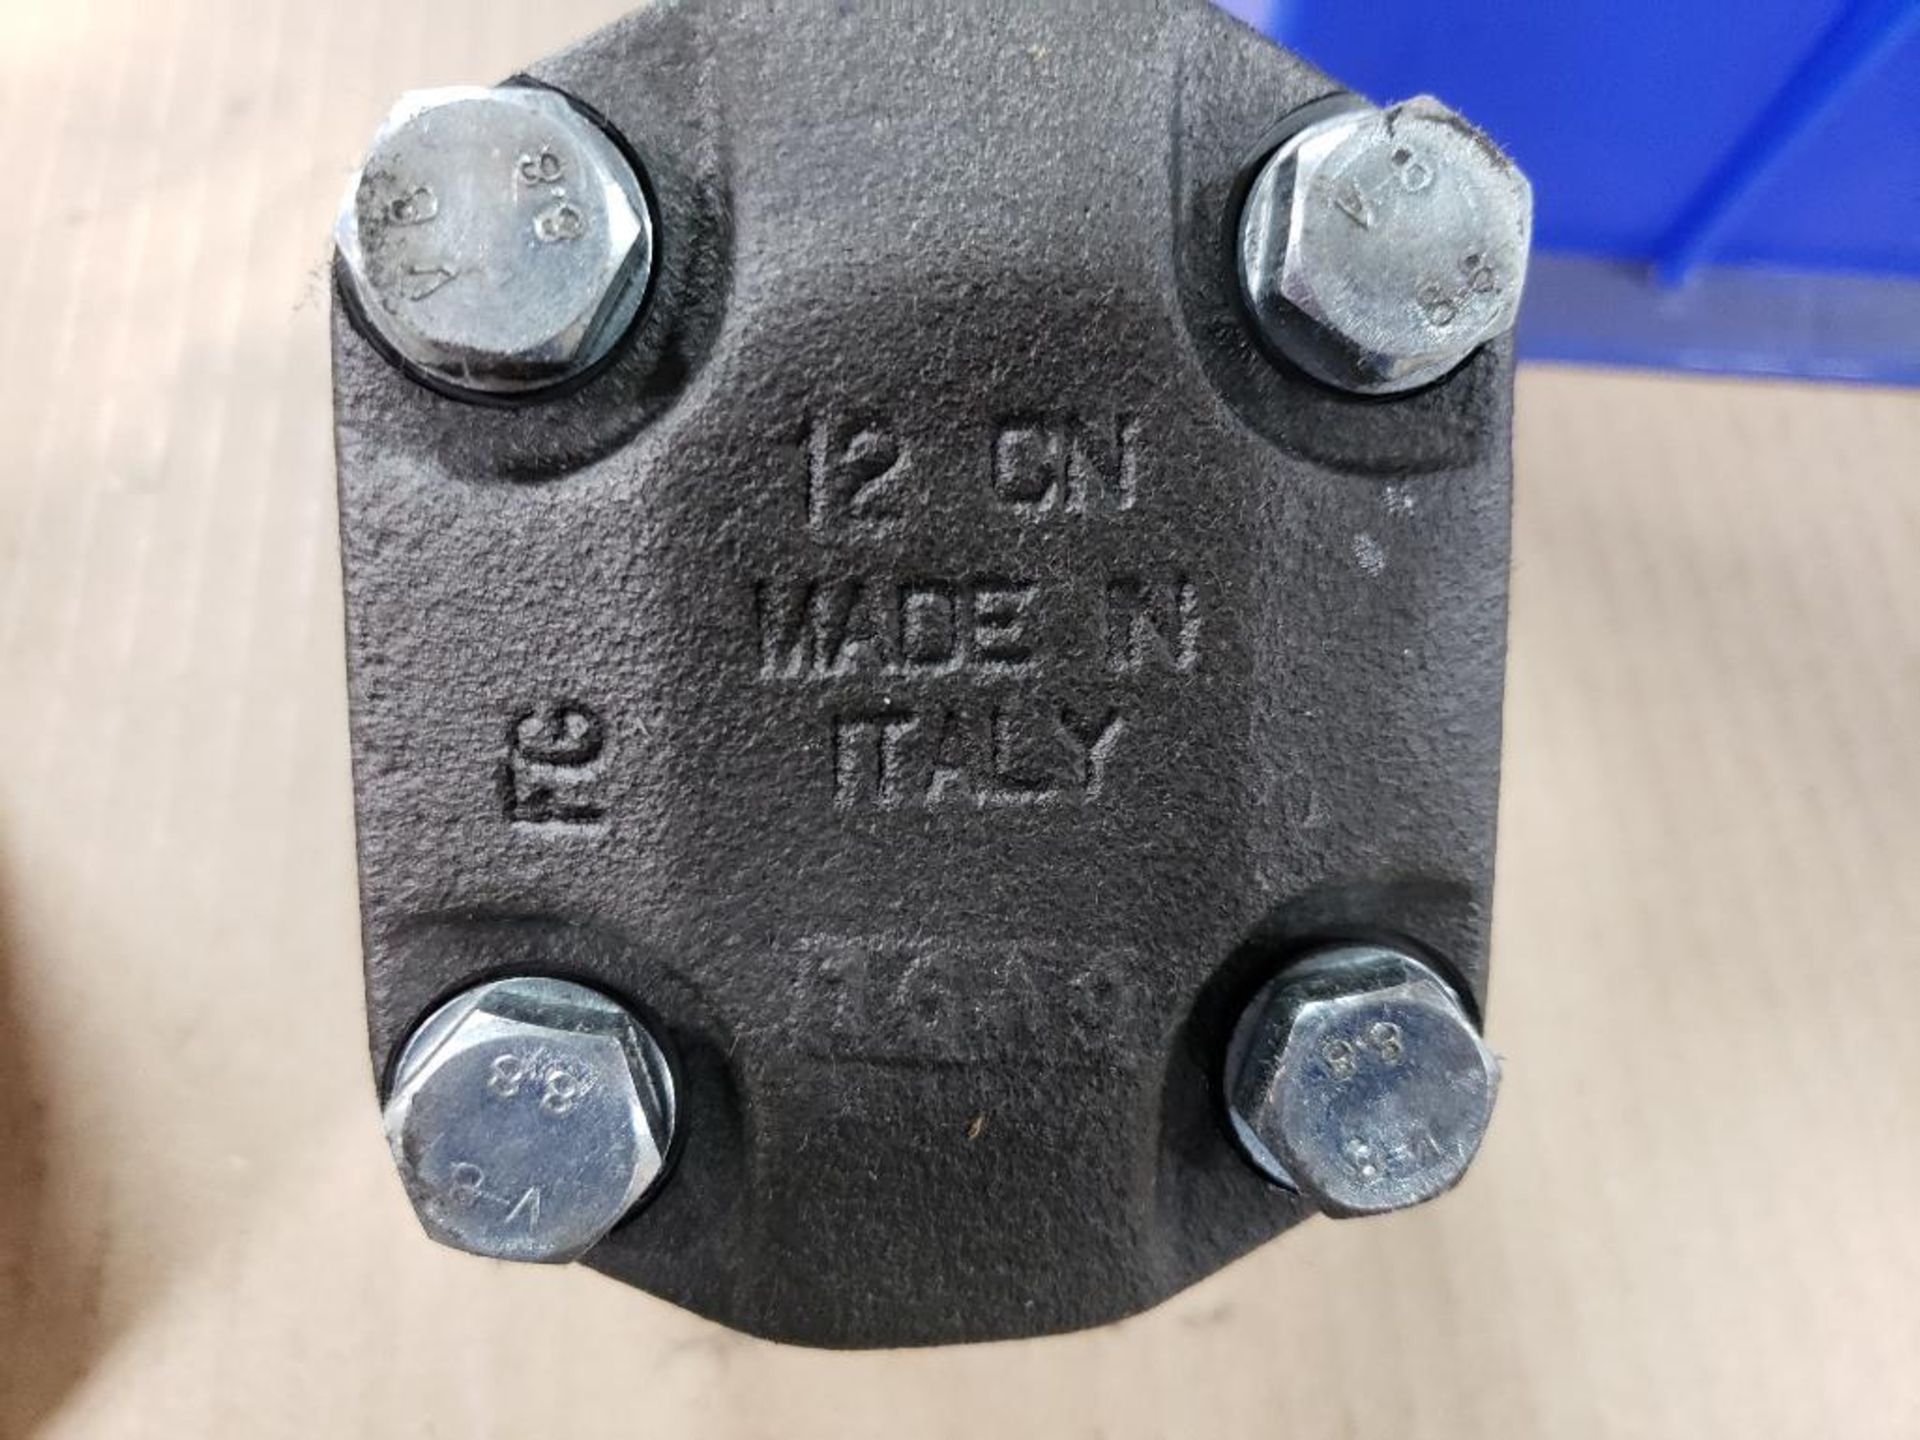 Qty 2 - Gear pumps. Part number N1090003. - Image 8 of 9